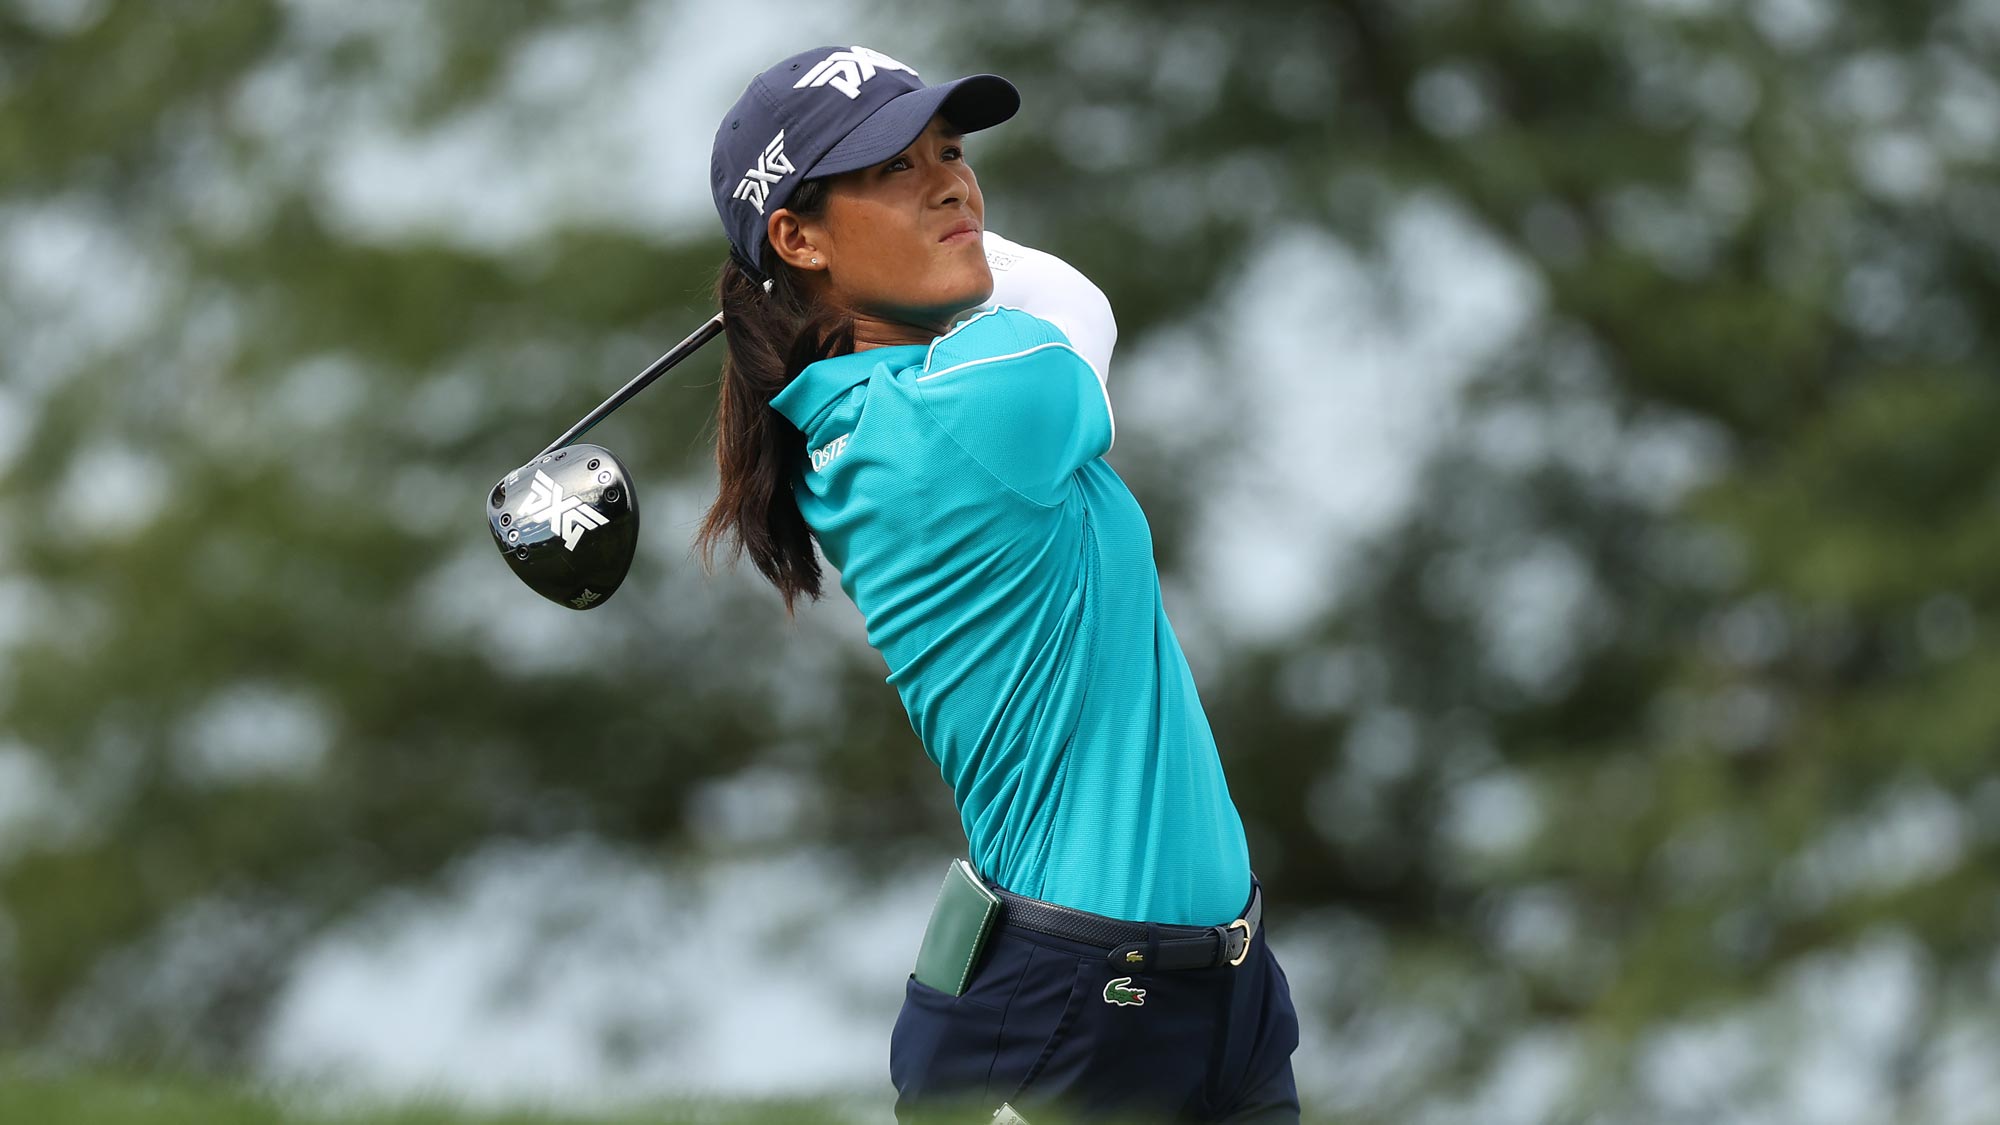 Celine Boutier of France plays her shot from the 14th tee during the final round of the LPGA Drive On Championship